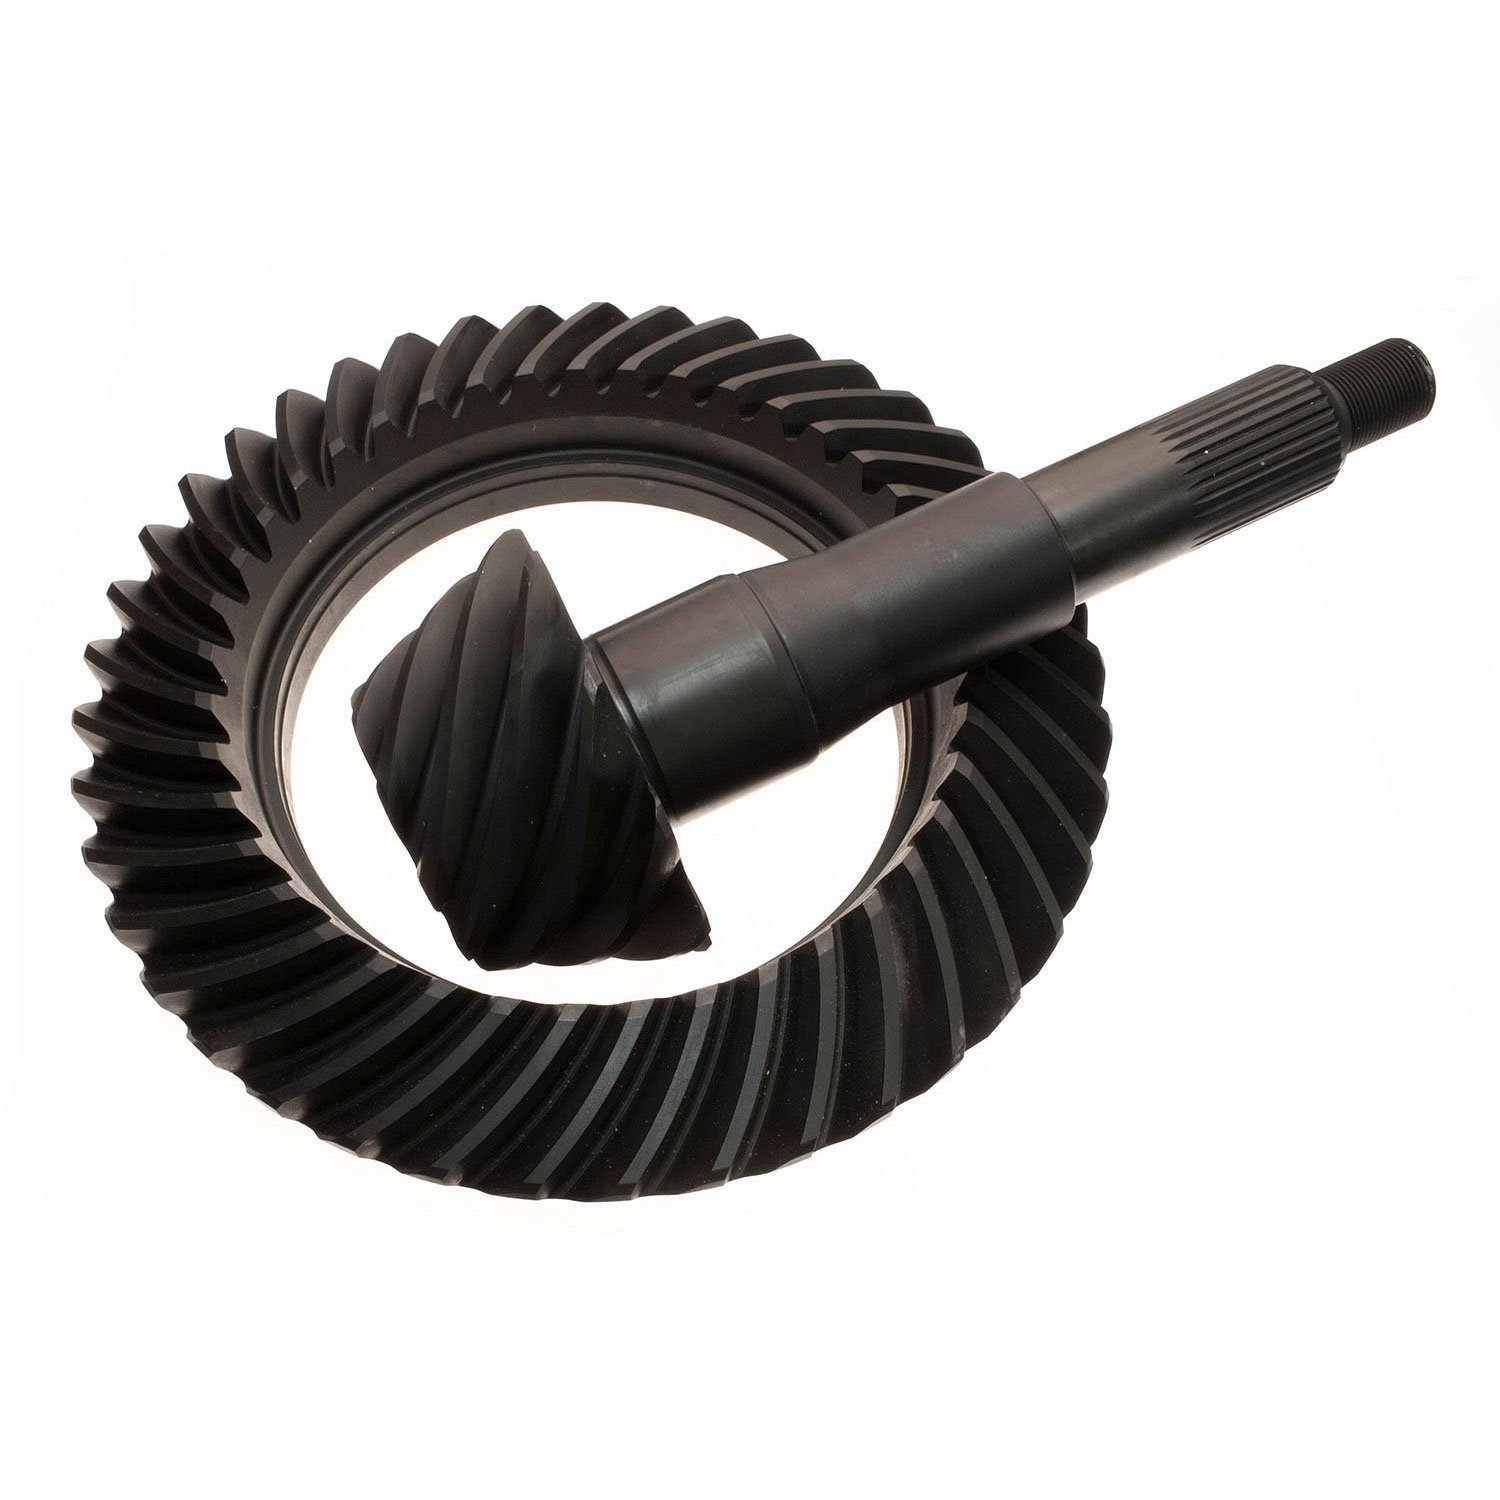 Ring & Pinion Gears Ford 10.25" 4.10 Ratio